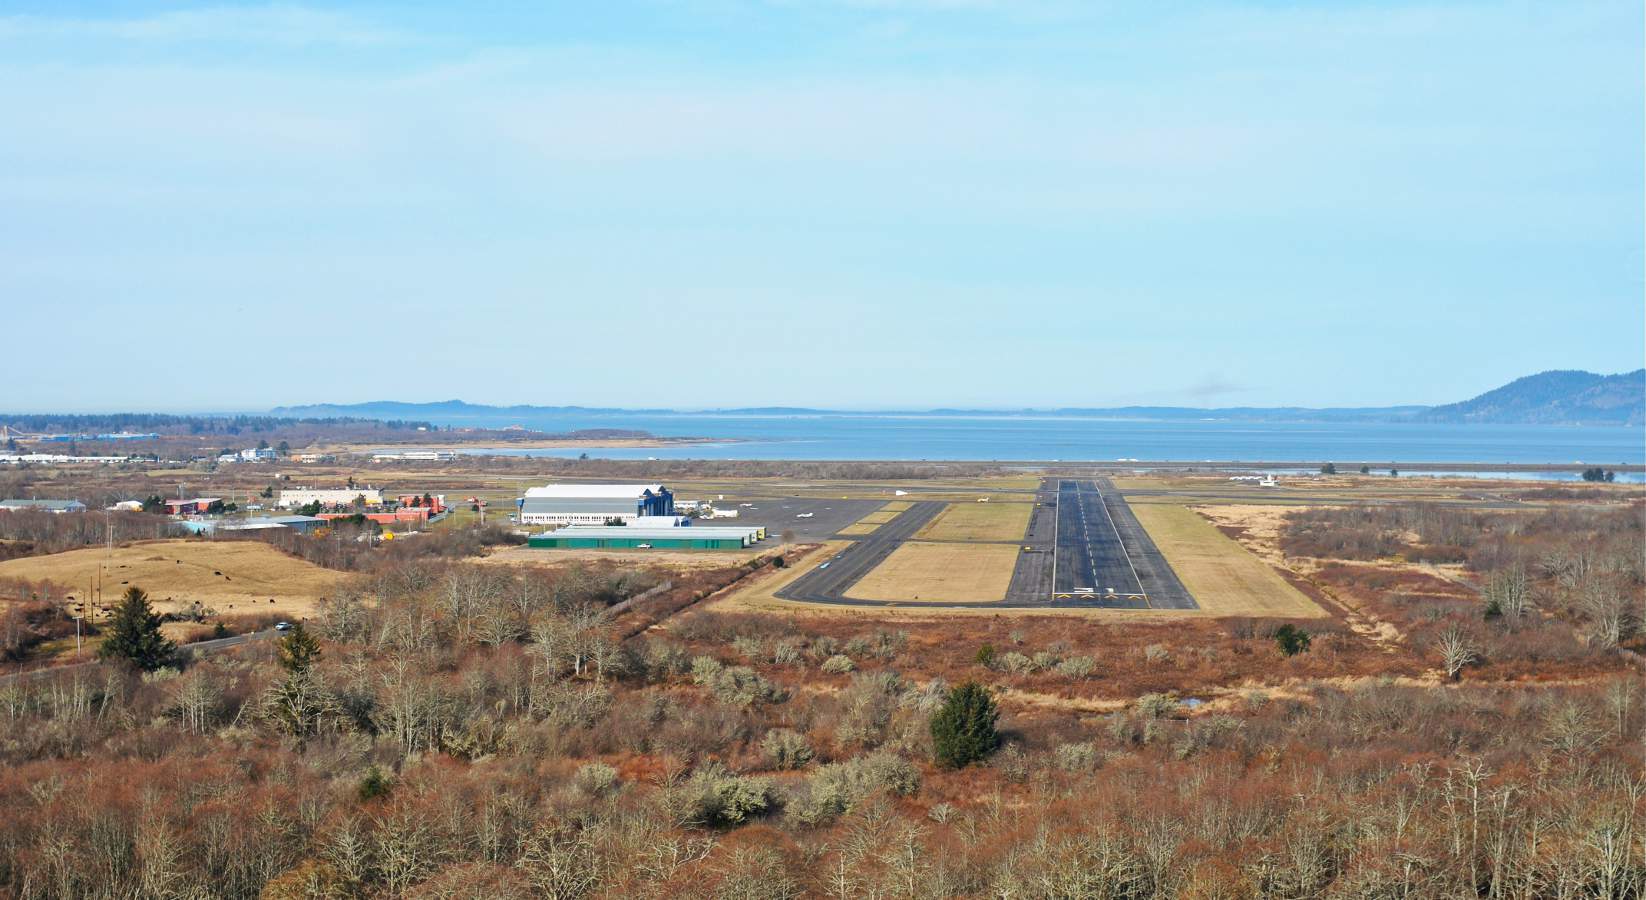 Photo of the approach to the Astoria Regional airport when you visit Astoria Oregon.